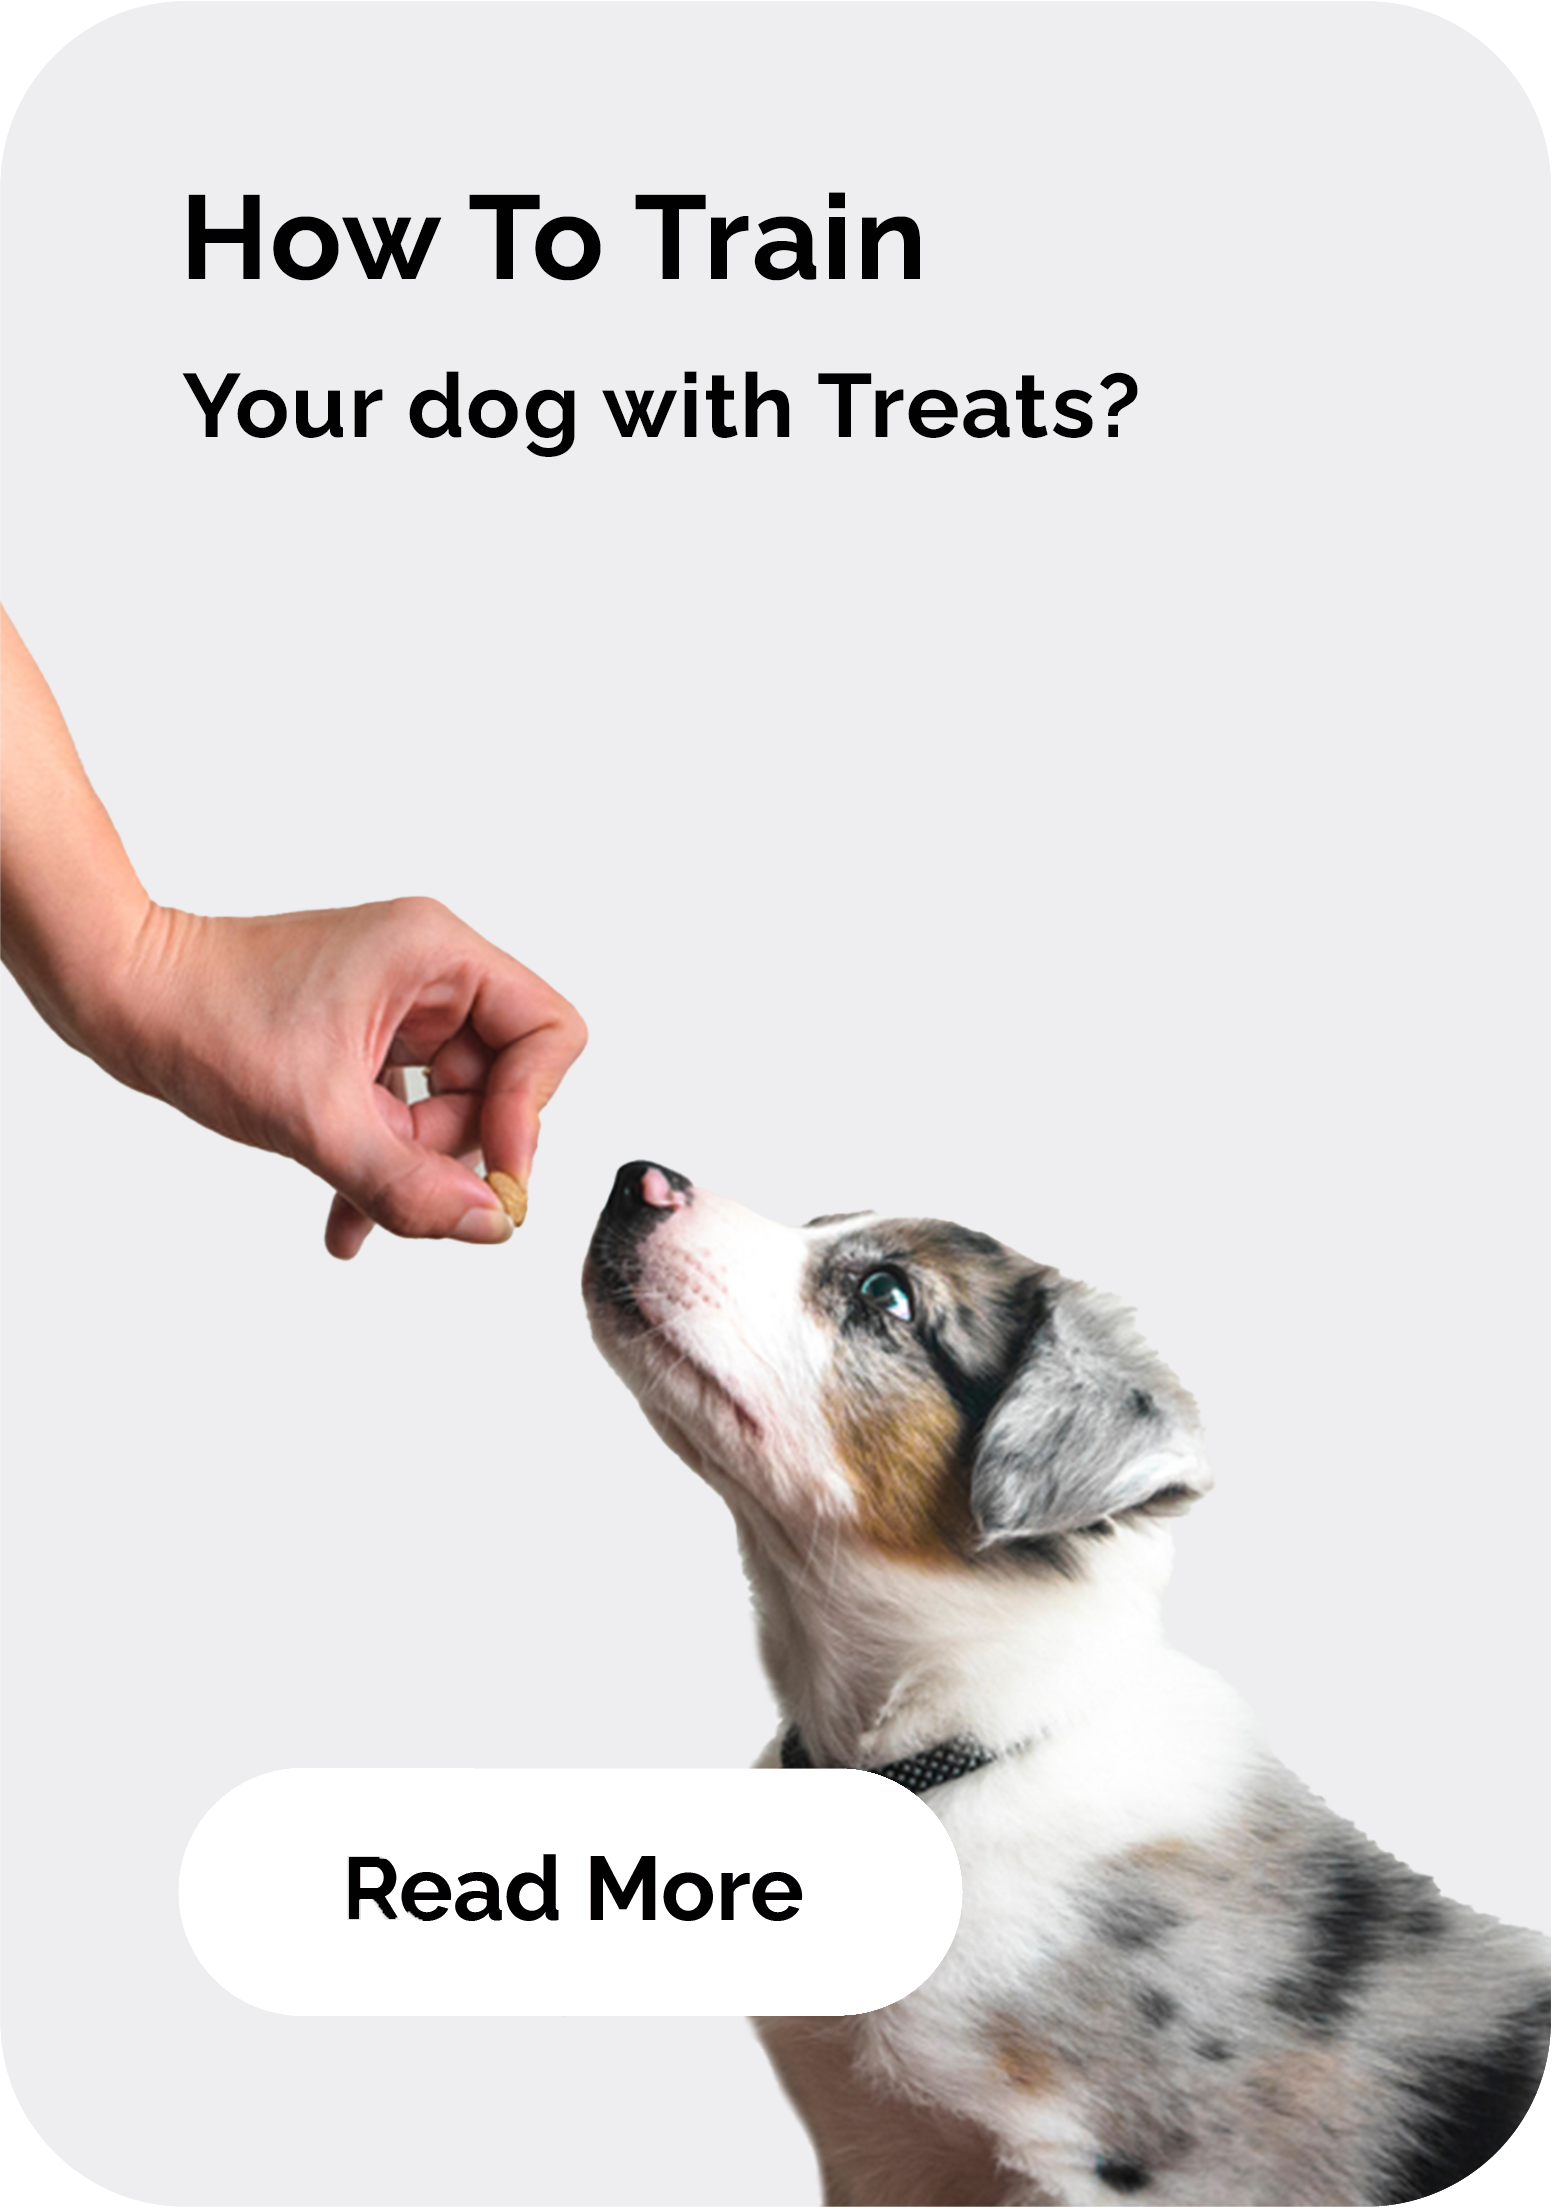 How To Train Your Dog With Treats?